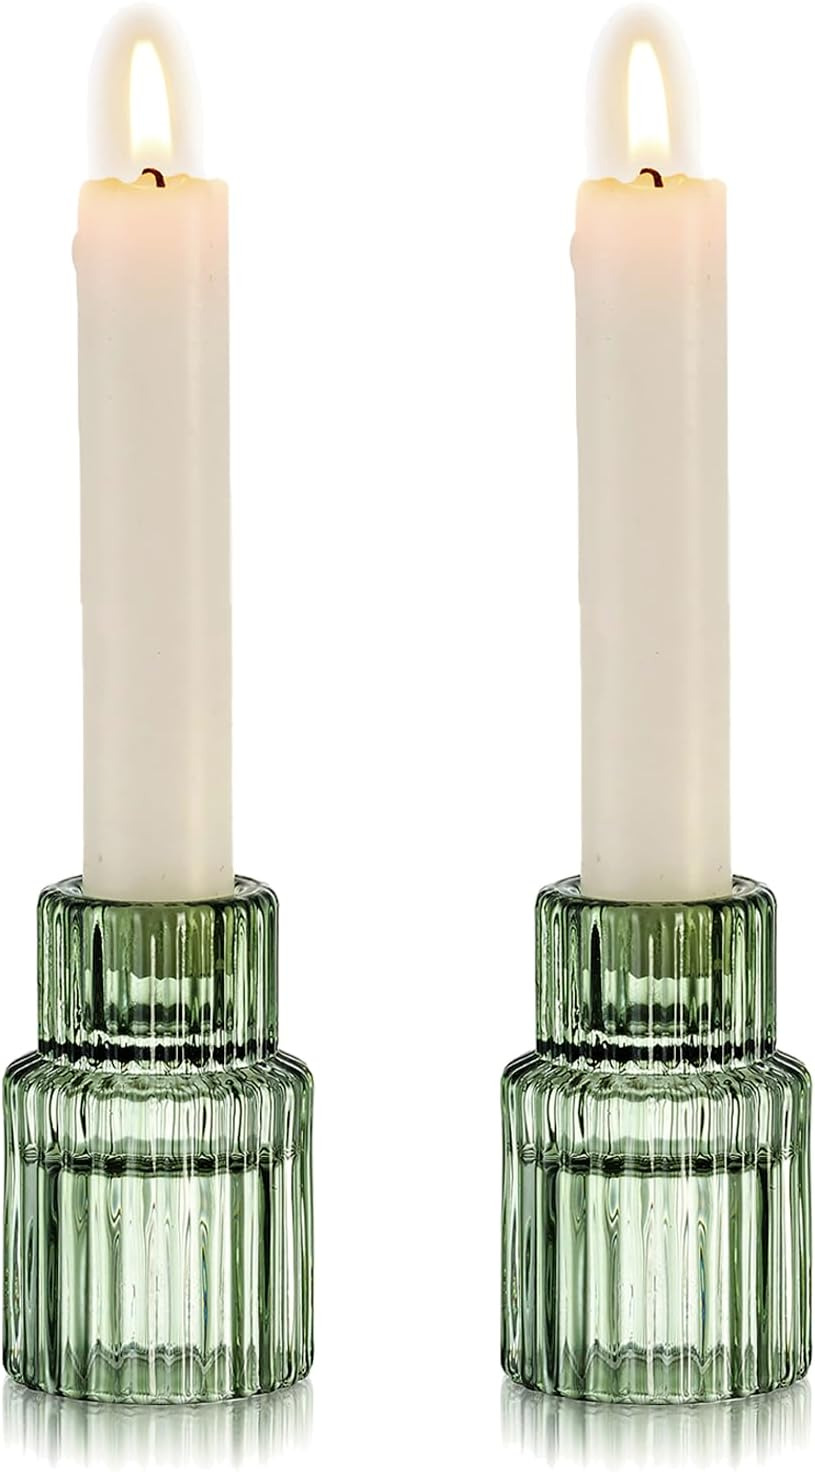 Glass Taper Candle Holders: 2PCS Green Vintage Candle Holder Candlestick Holders